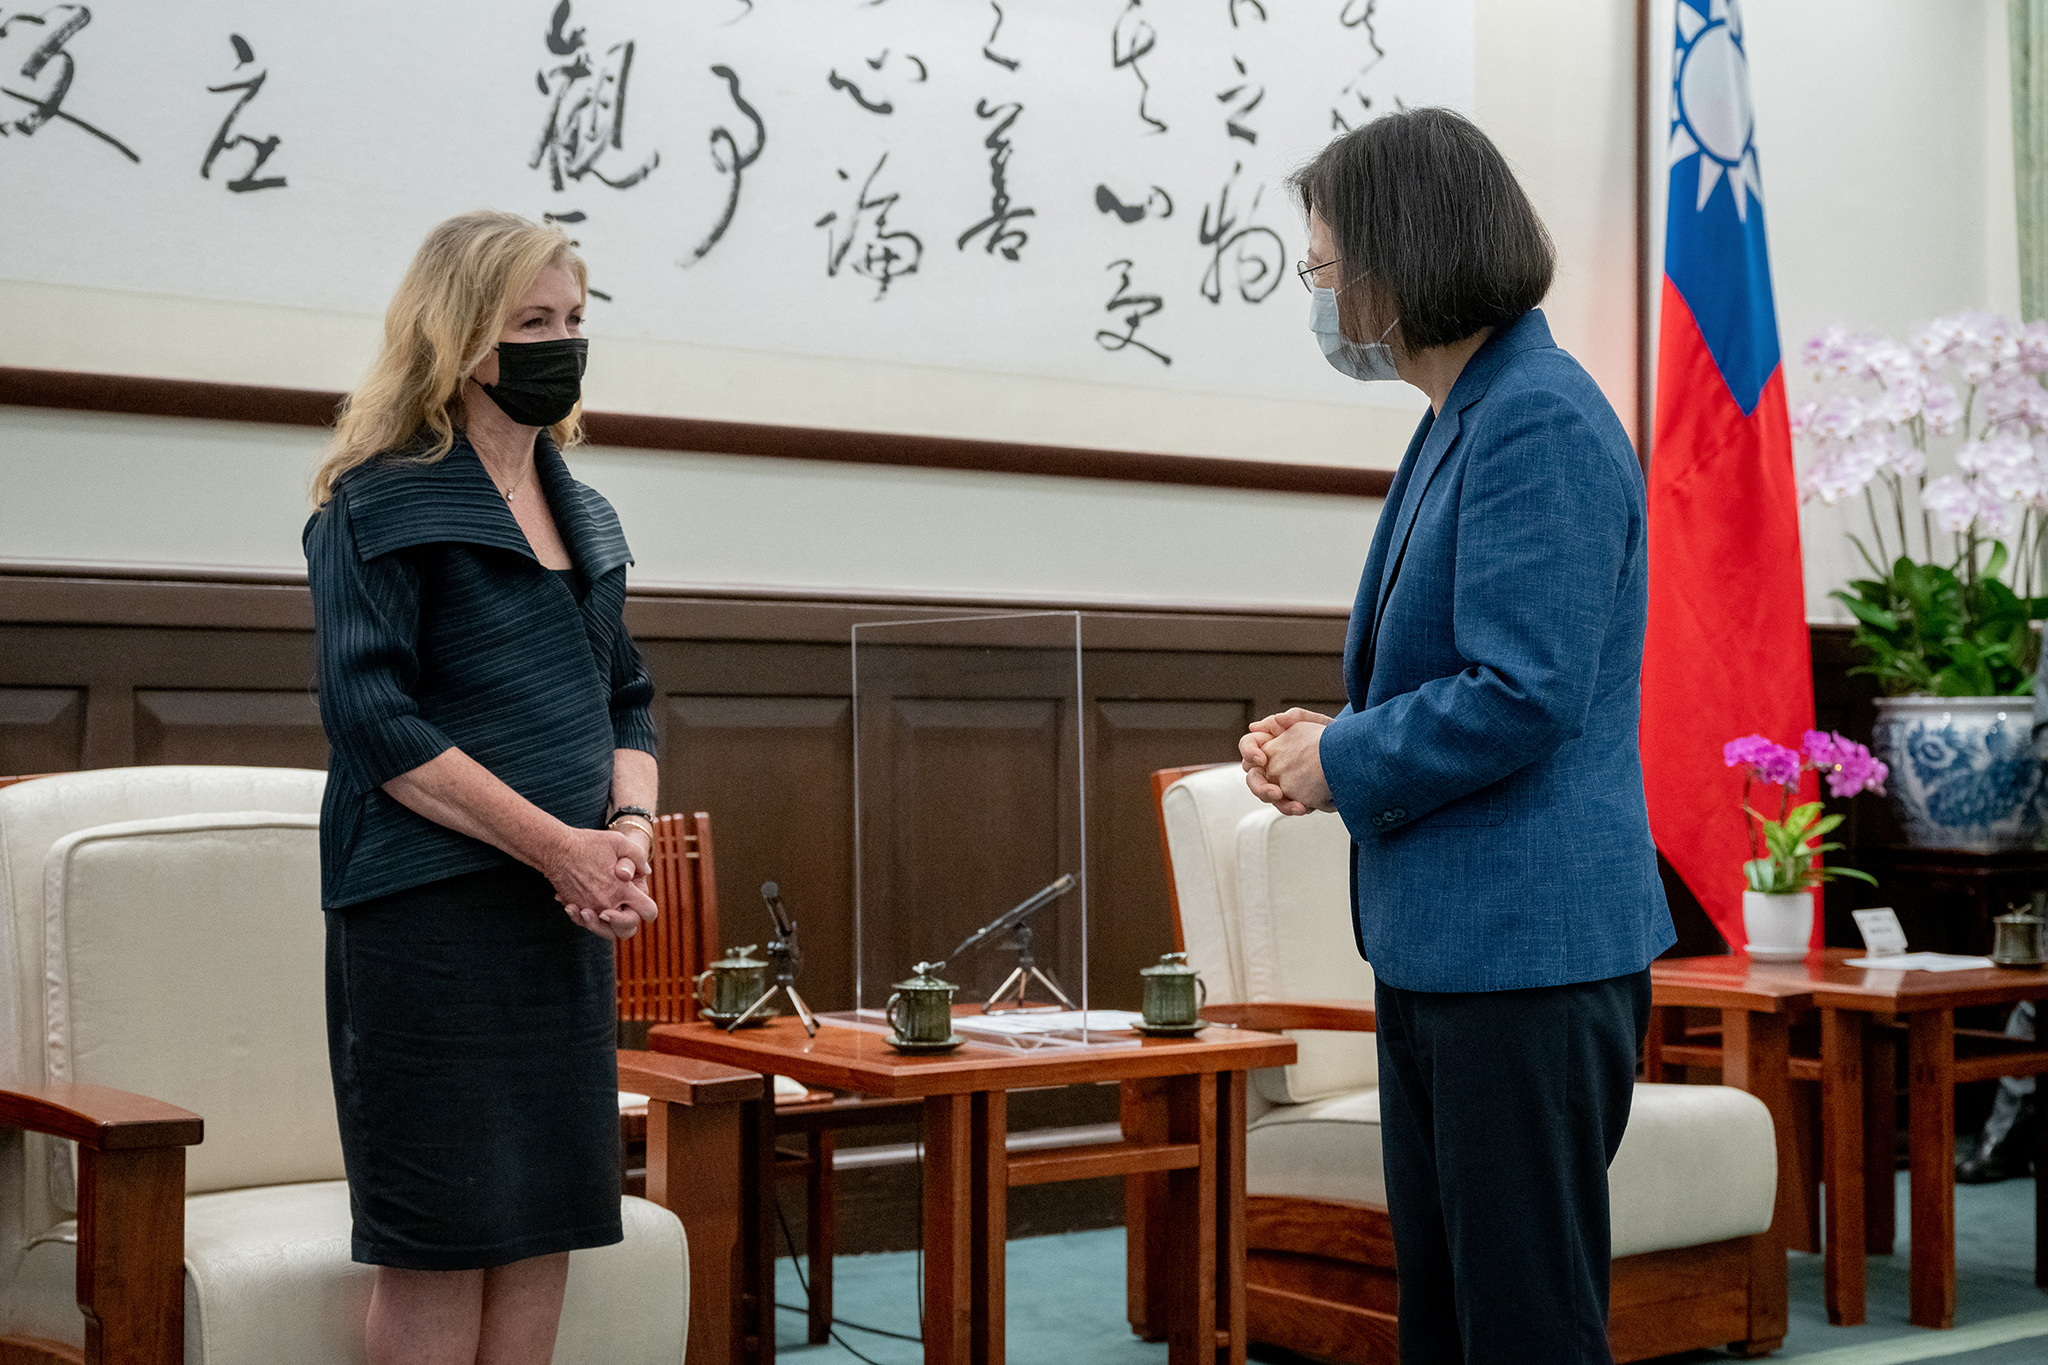 U.S. Senator Marsha Blackburn (R-TN) attends a meeting with Taiwan President Tsai Ing-wen at the presidential office in Taipei, Taiwan in this handout picture released August 26, 2022. Taiwan Presidential Office/Handout via REUTERS ATTENTION EDITORS - THIS IMAGE WAS PROVIDED BY A THIRD PARTY. NO RESALES. NO ARCHIVES.